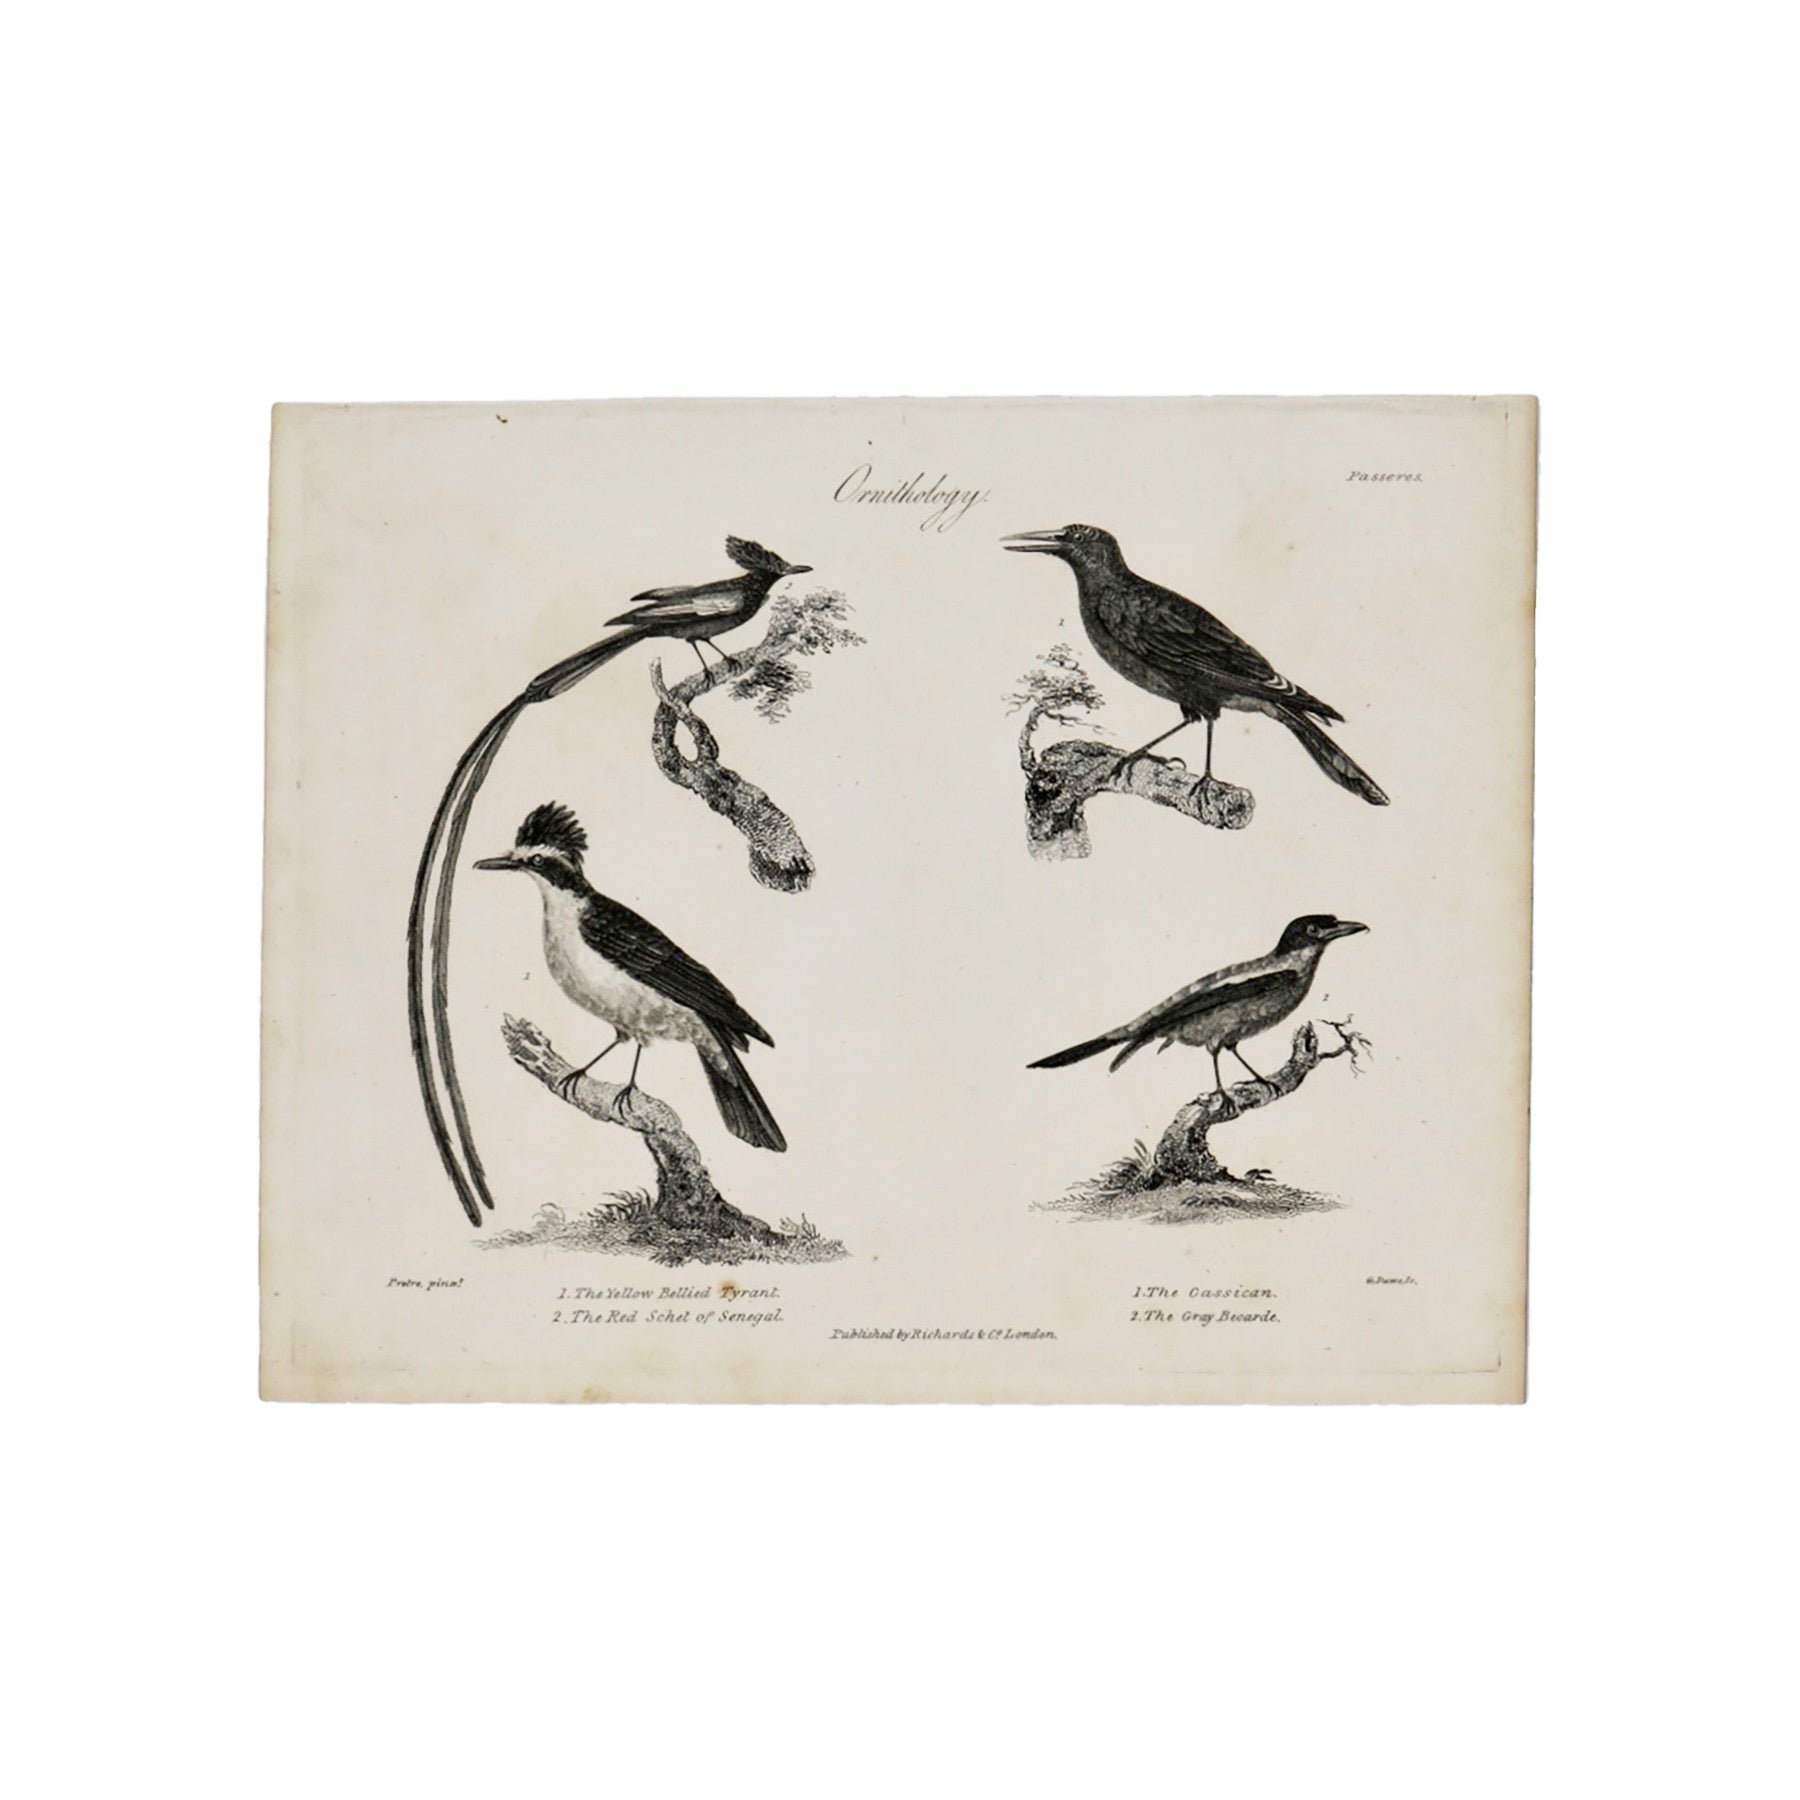 Ornithology (Yellow Bellied Tyrant, Red Schet of Senegal, The Cassican, The Gray Beoarde)  Antique 1820 Engraving from "The Modern Encyclopedia: The Latest Discoveries in each Department of Knowledge."  1820s etching depicting four birds: The Yellow Bellied Tyrant, The Red Schet of Senegal, The Cassican, and The Gray Beoarde.  Measures 10.5 x 8.25 inches.